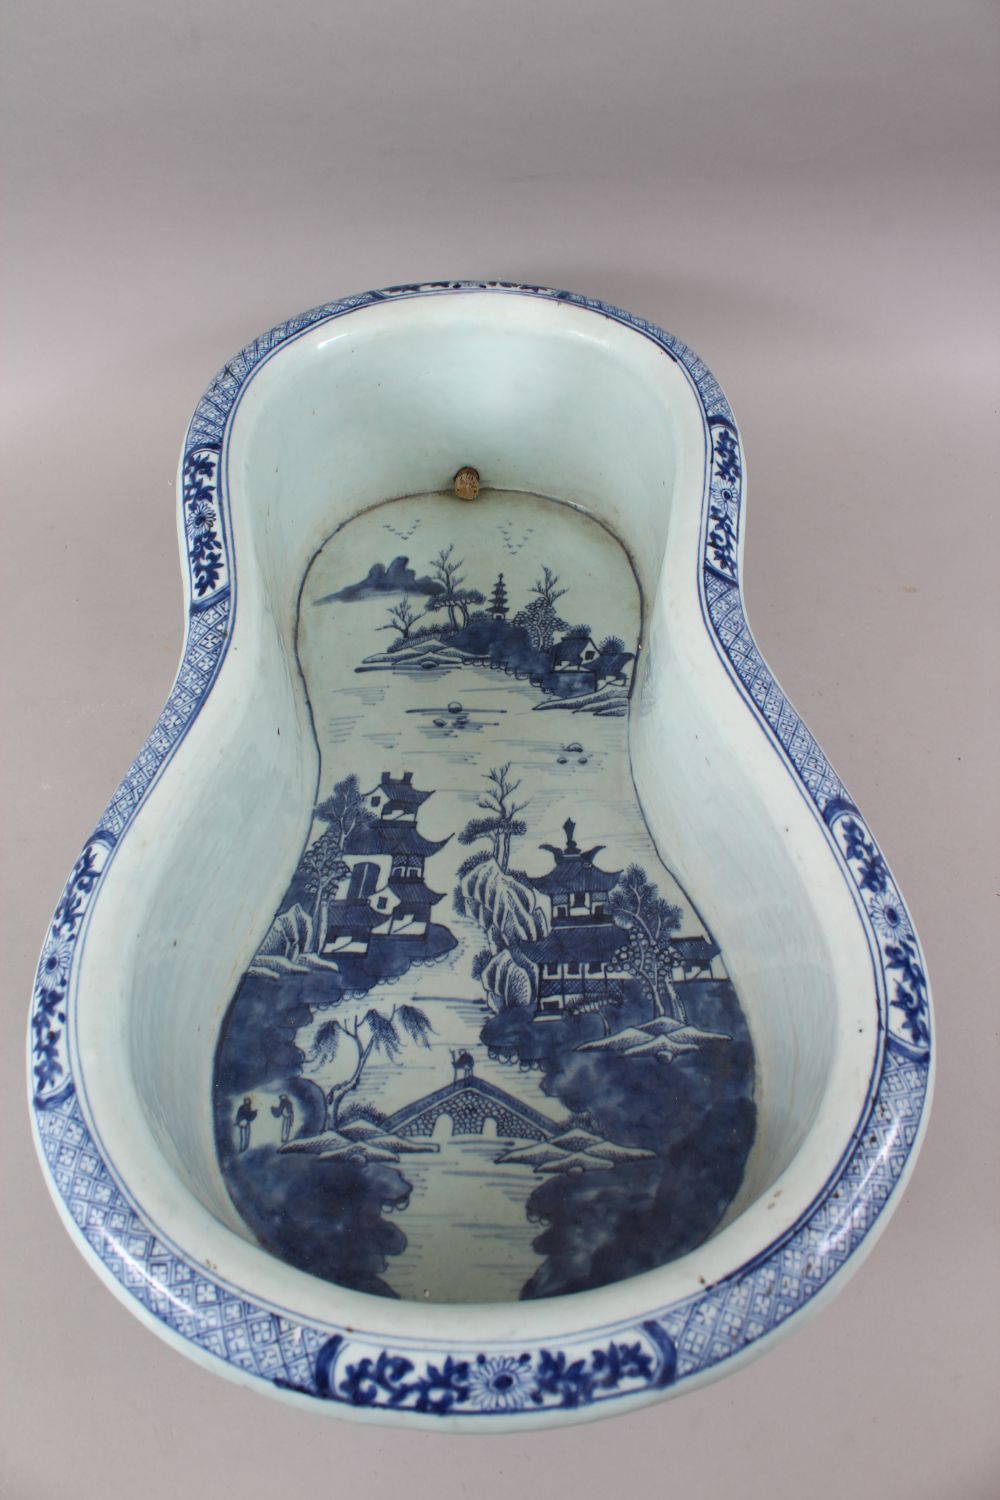 AN 18TH CENTURY CHINESE BLUE AND WHITE PORCELAIN BASIN / BIDET, decorated with landscape scenes, - Image 2 of 3